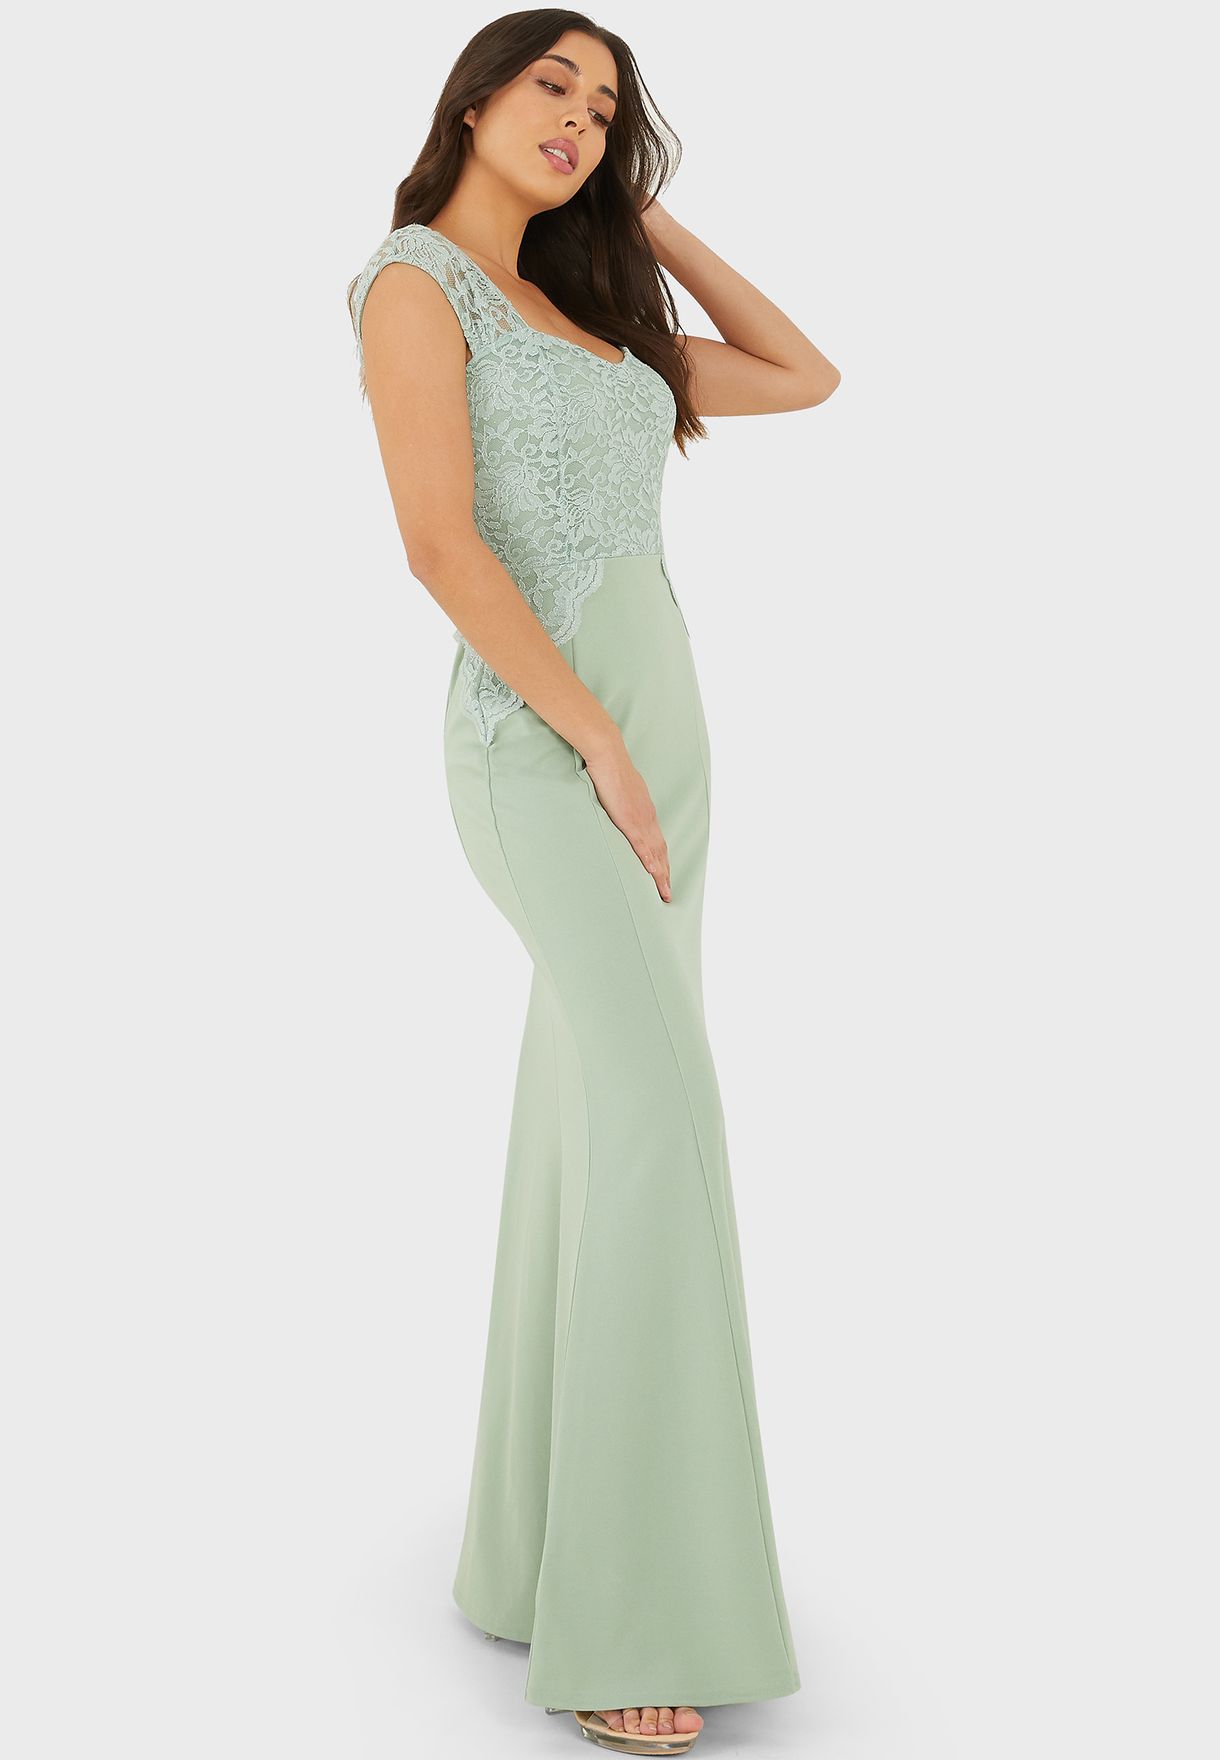 Glitter Lace Ruched Cap Sleeve Maxi Dress